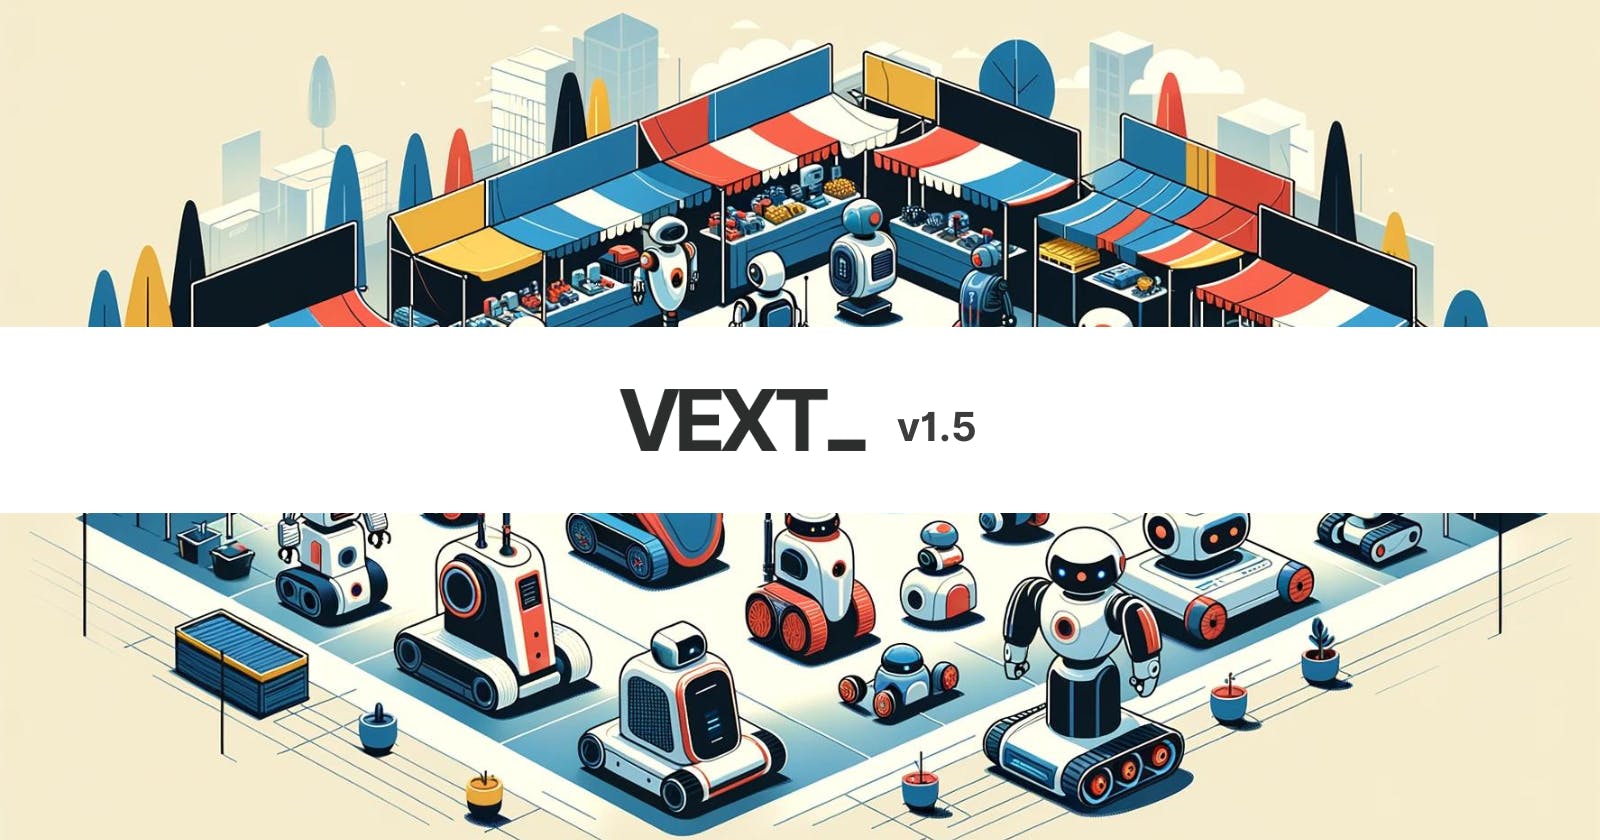 Vext v1.5: New Models and Improvements